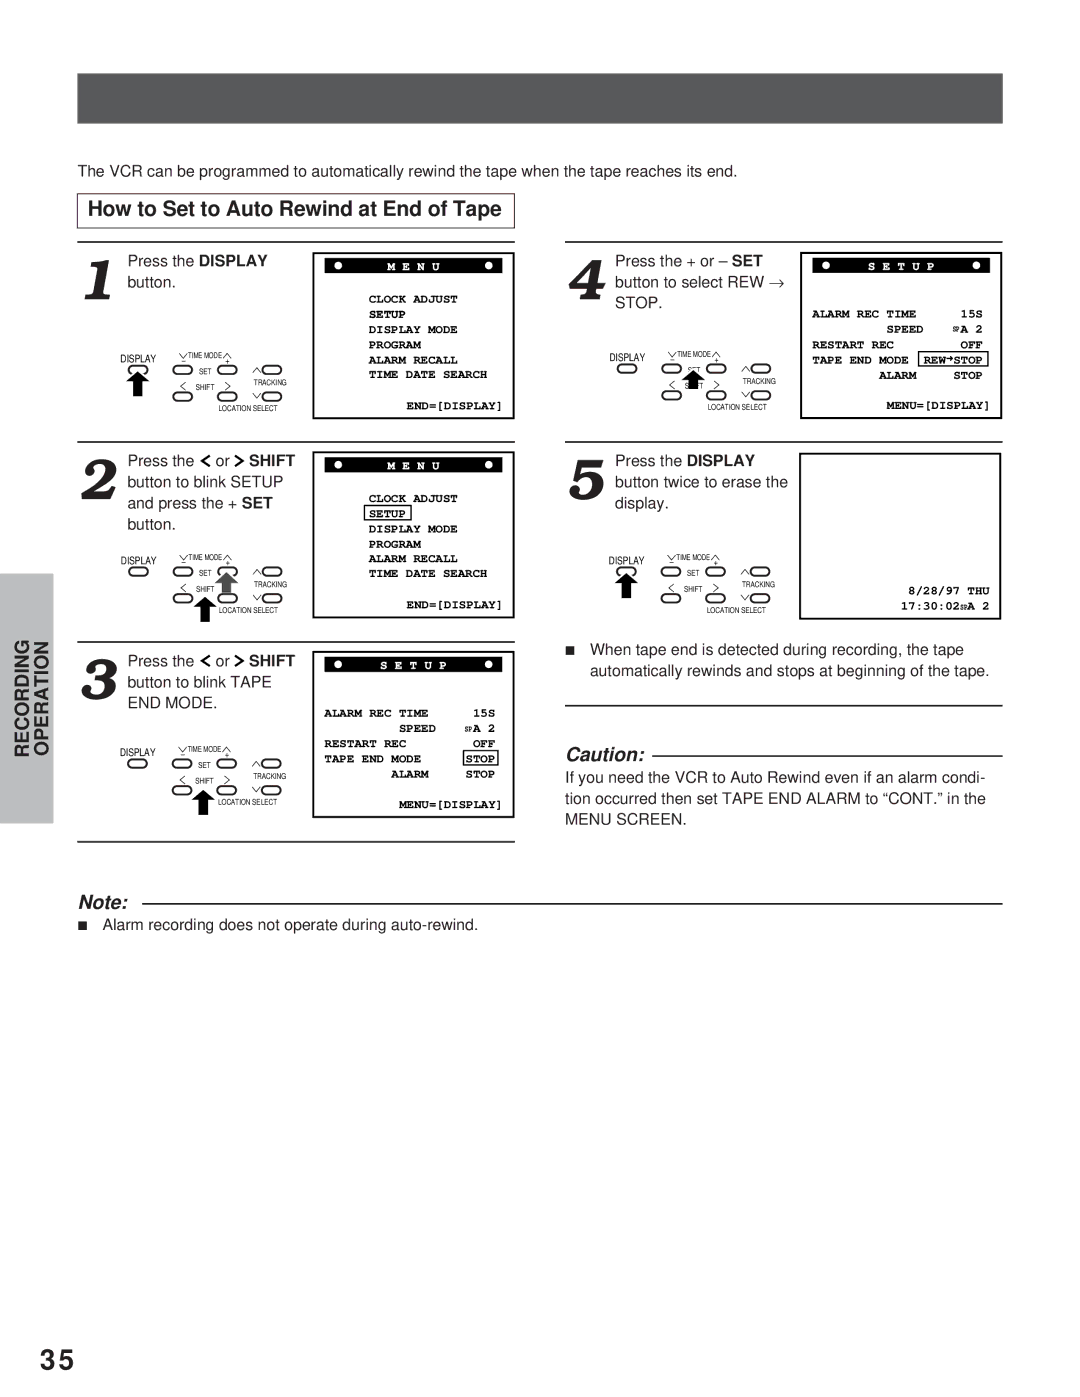 Toshiba kV-9168A instruction manual How to Set to Auto Rewind at End of Tape, Menu Screen 